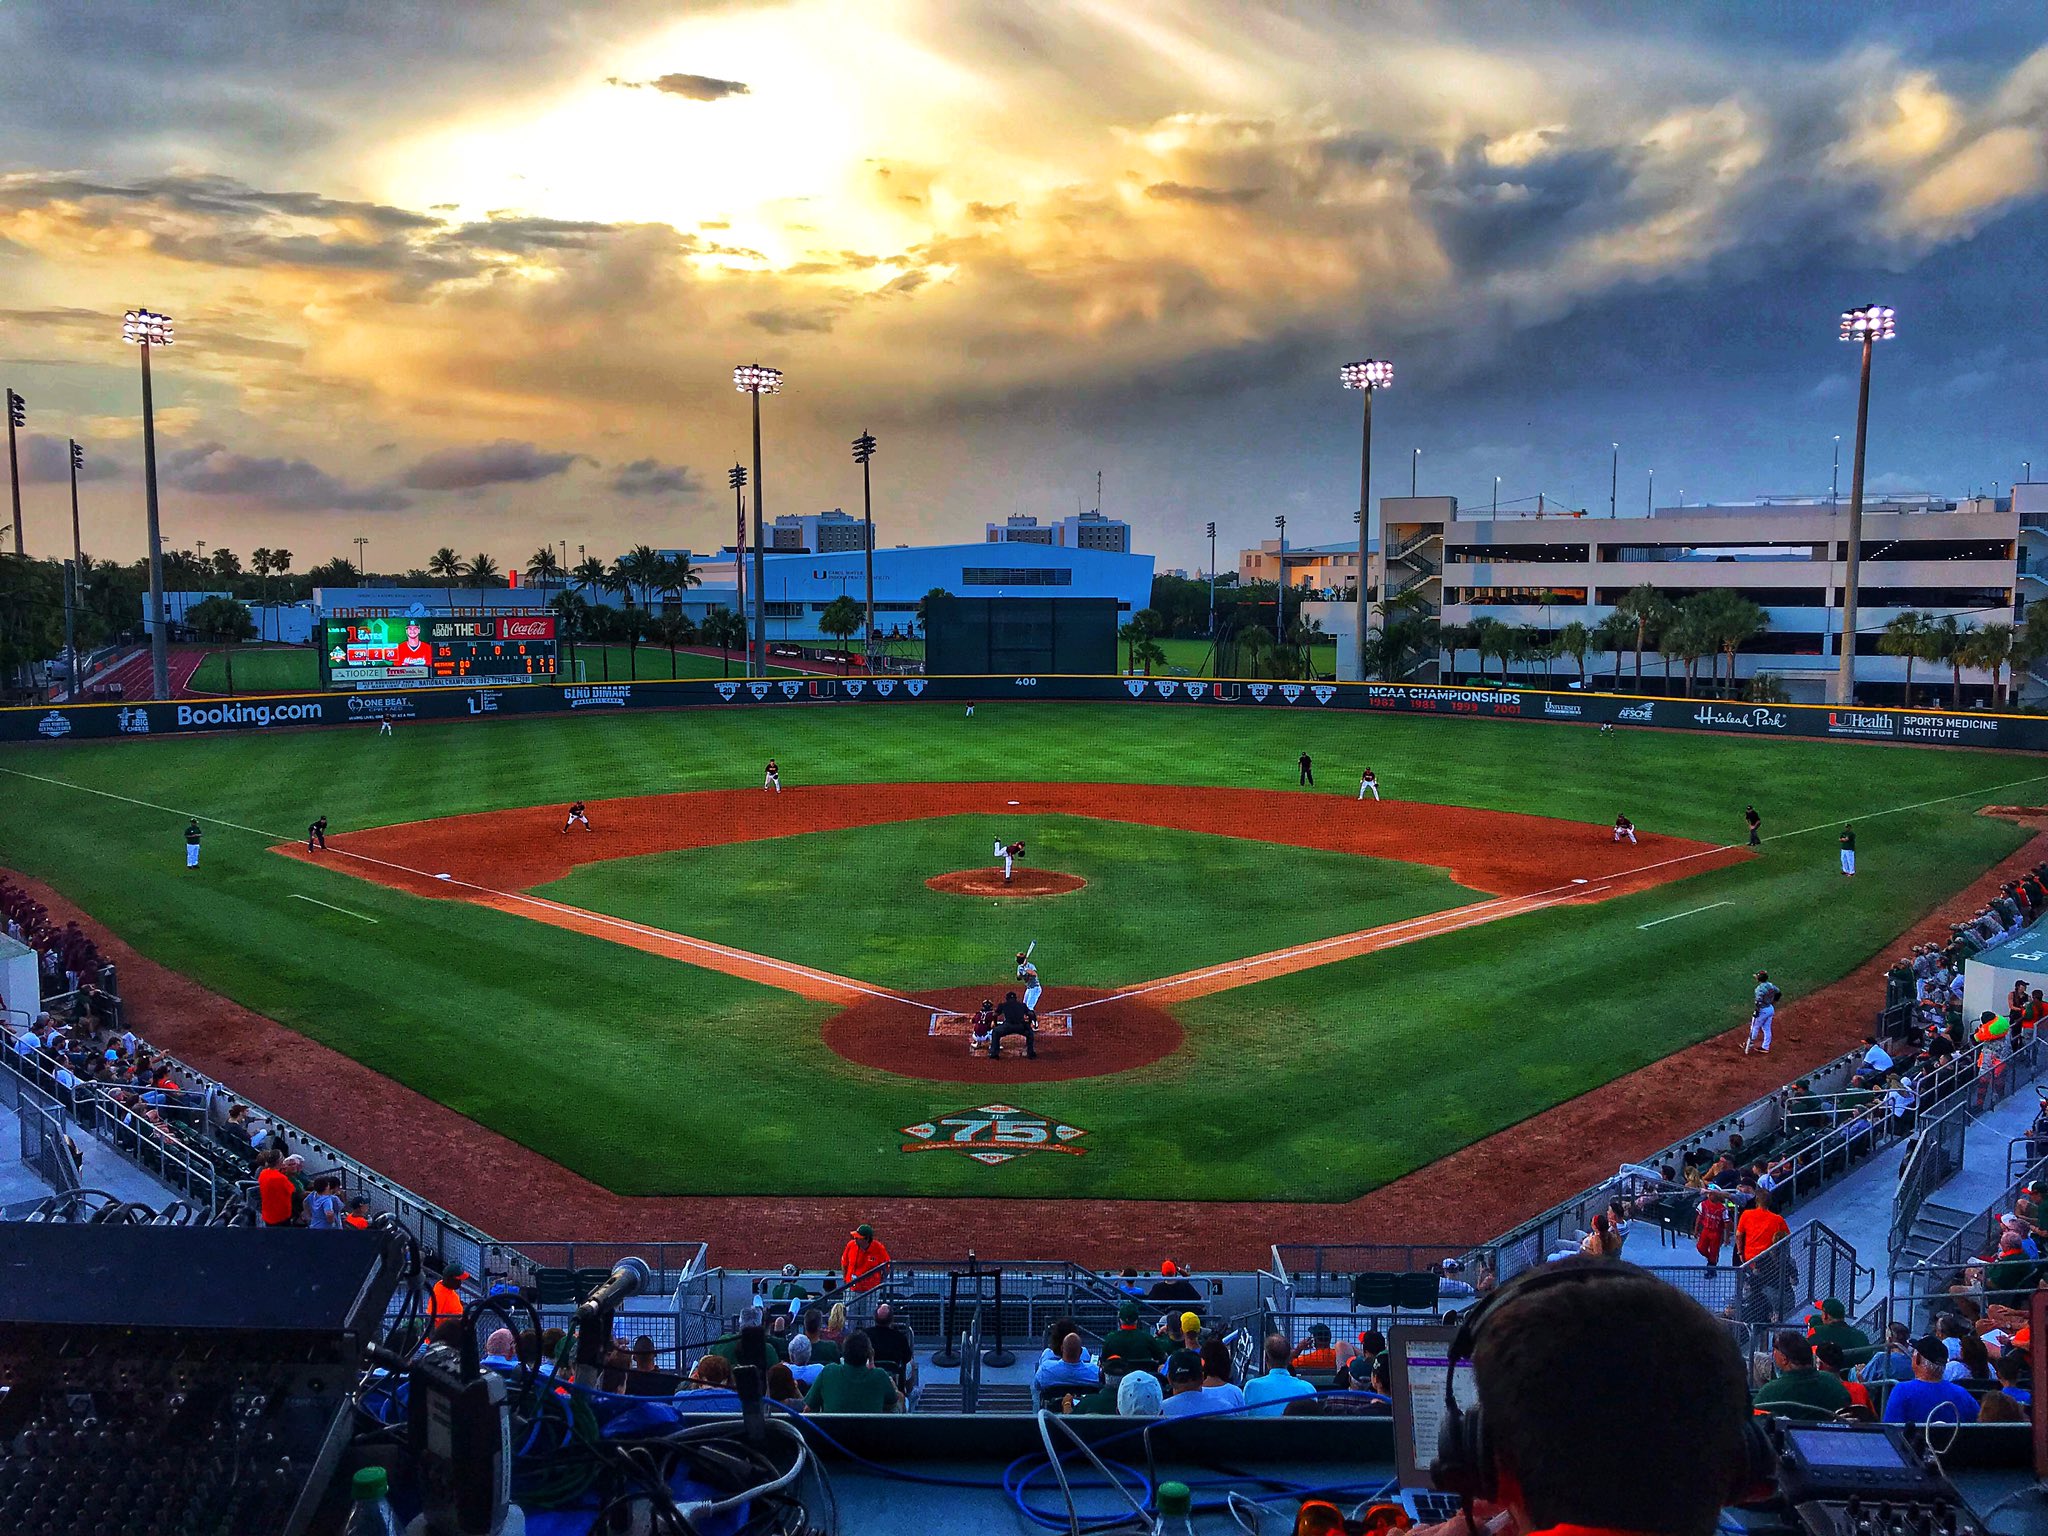 Miami Hurricanes Baseball on X: It's a beautiful night for